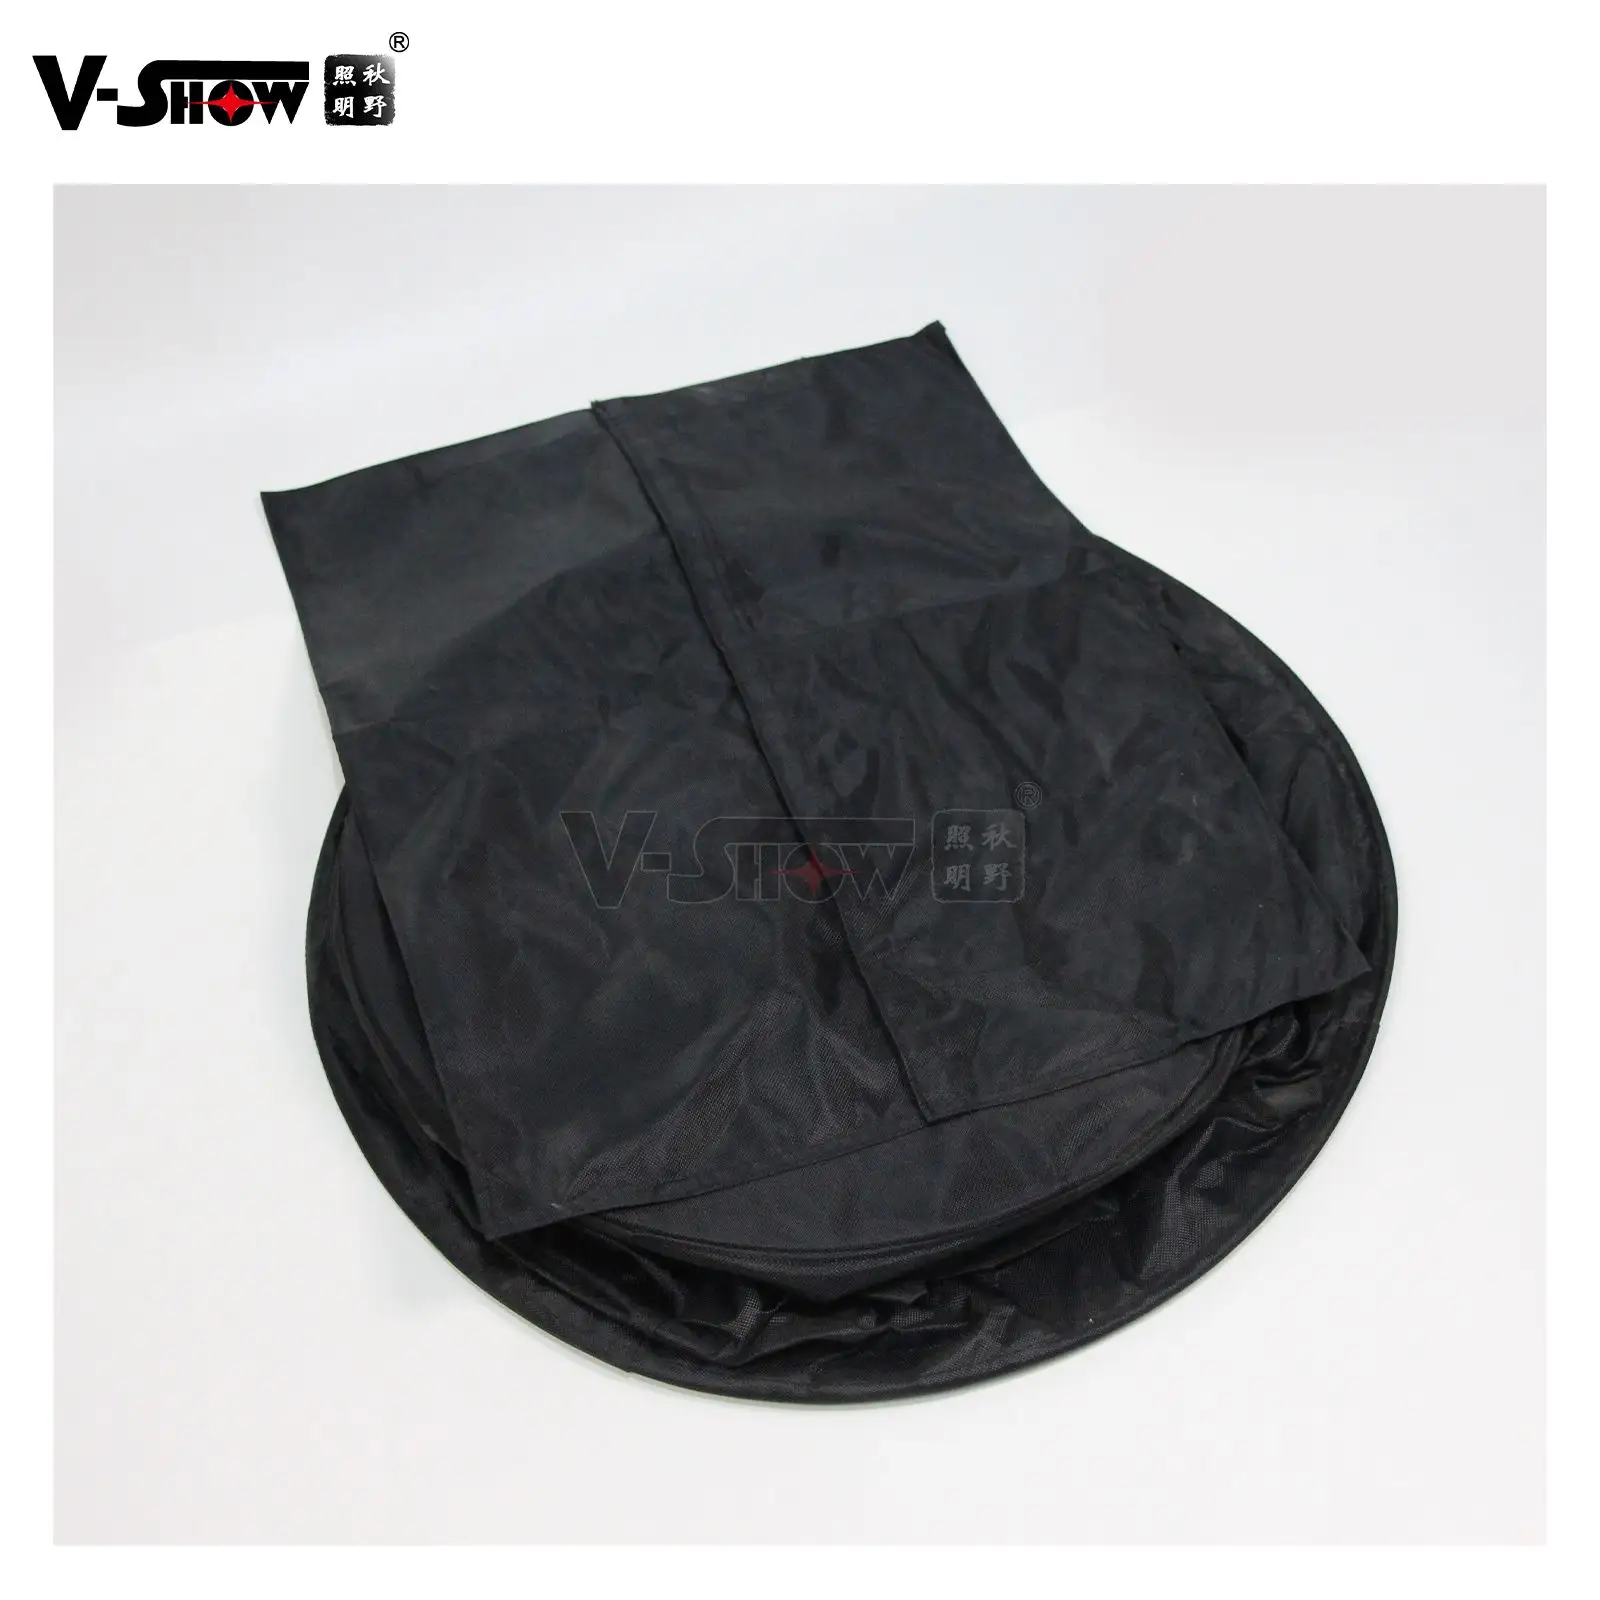 VSHOW Stage Light Rain Cover for 5R 7R 10R 15R 20R Moving Head beam Rain Cover Protector